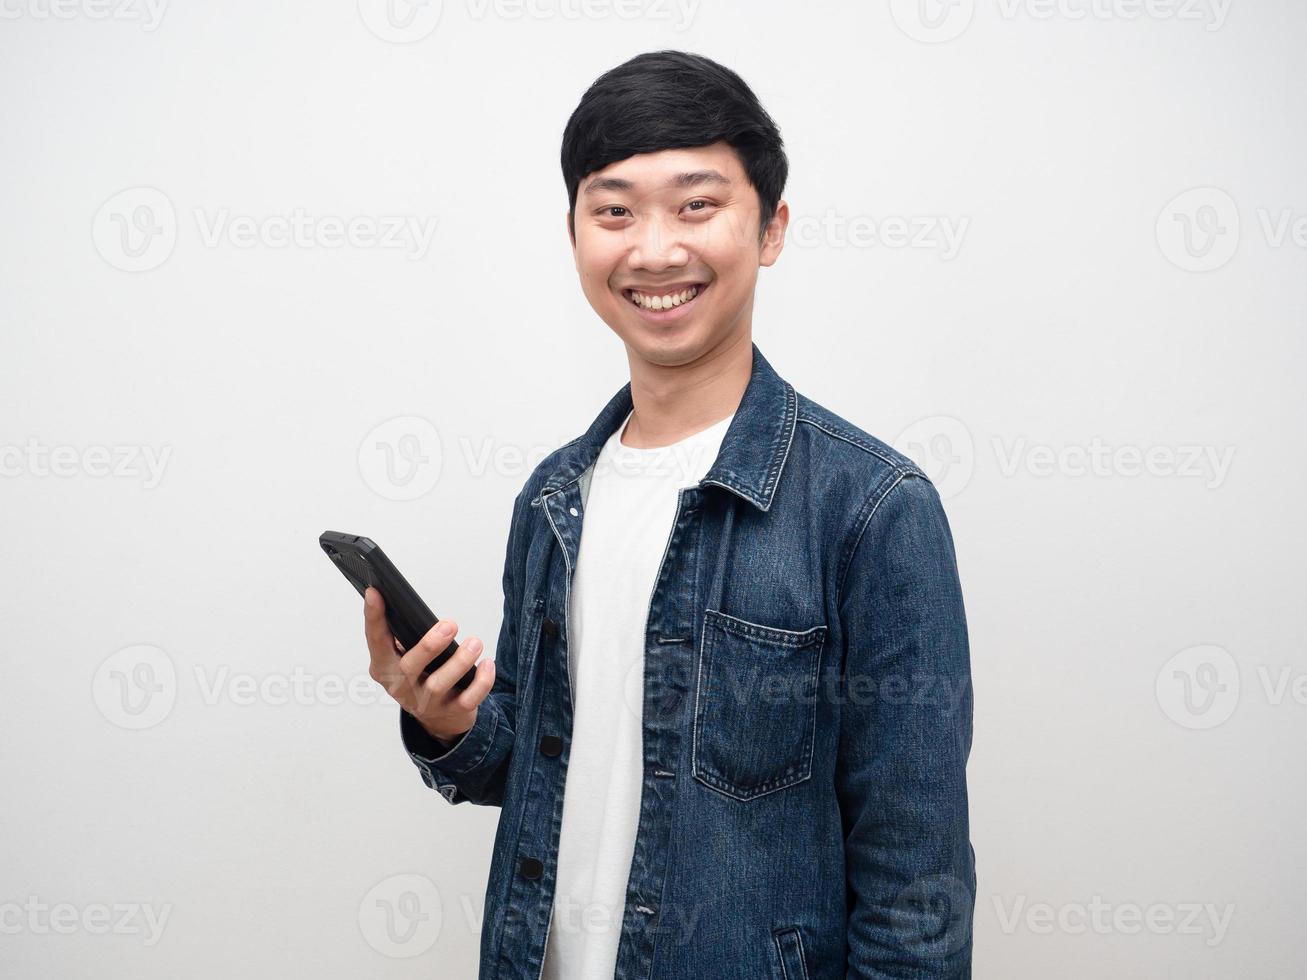 Cheerful man jeans chemise smile holding smartphone photo